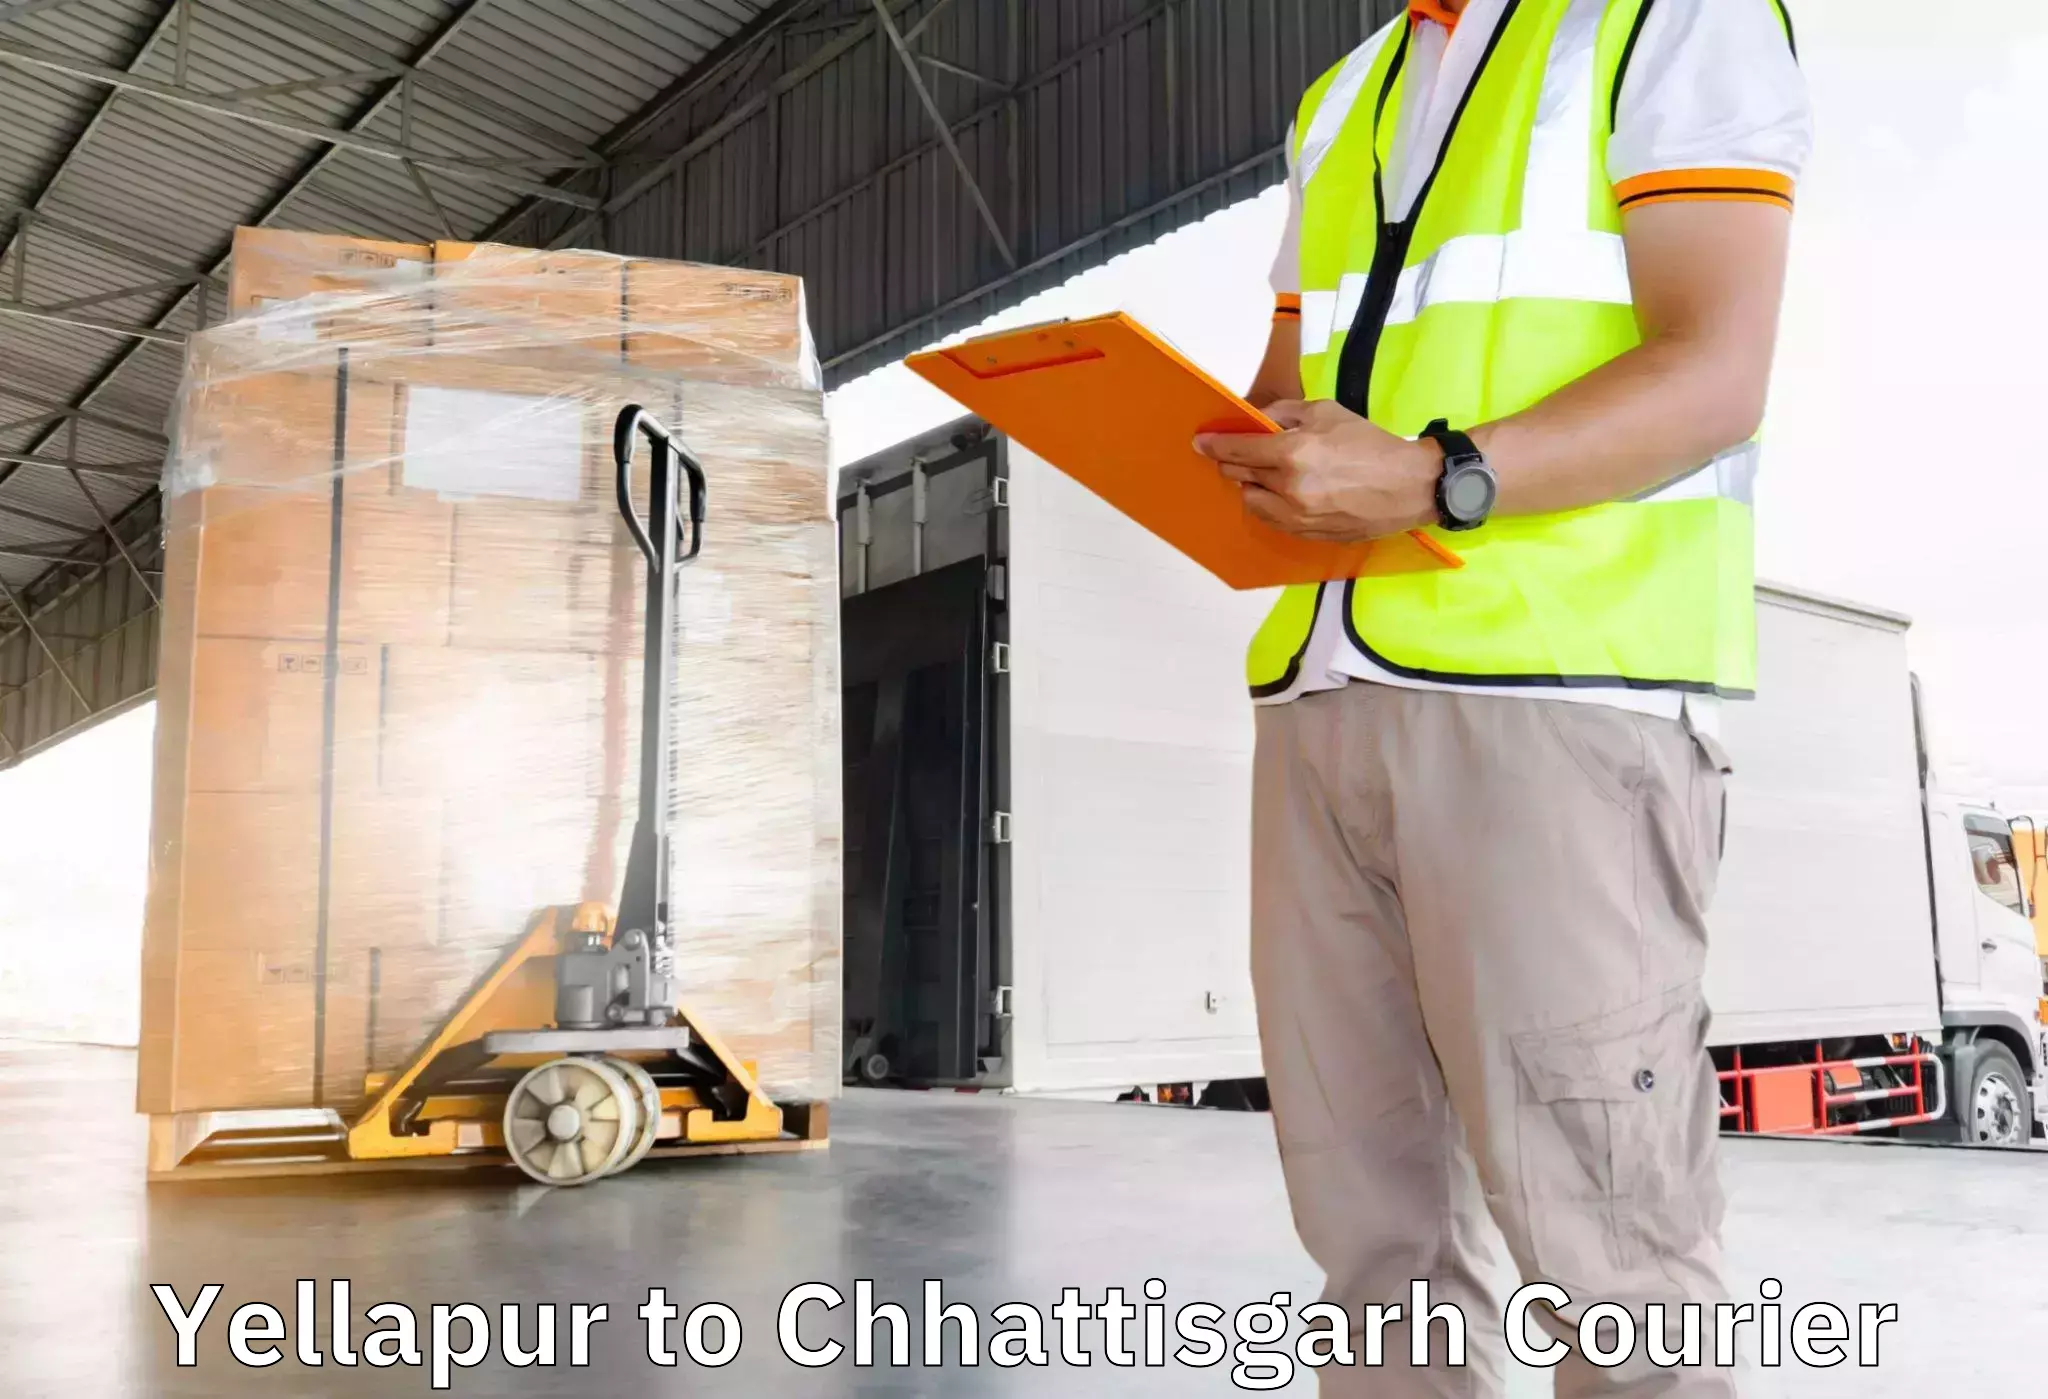 Furniture delivery service Yellapur to Sirpur